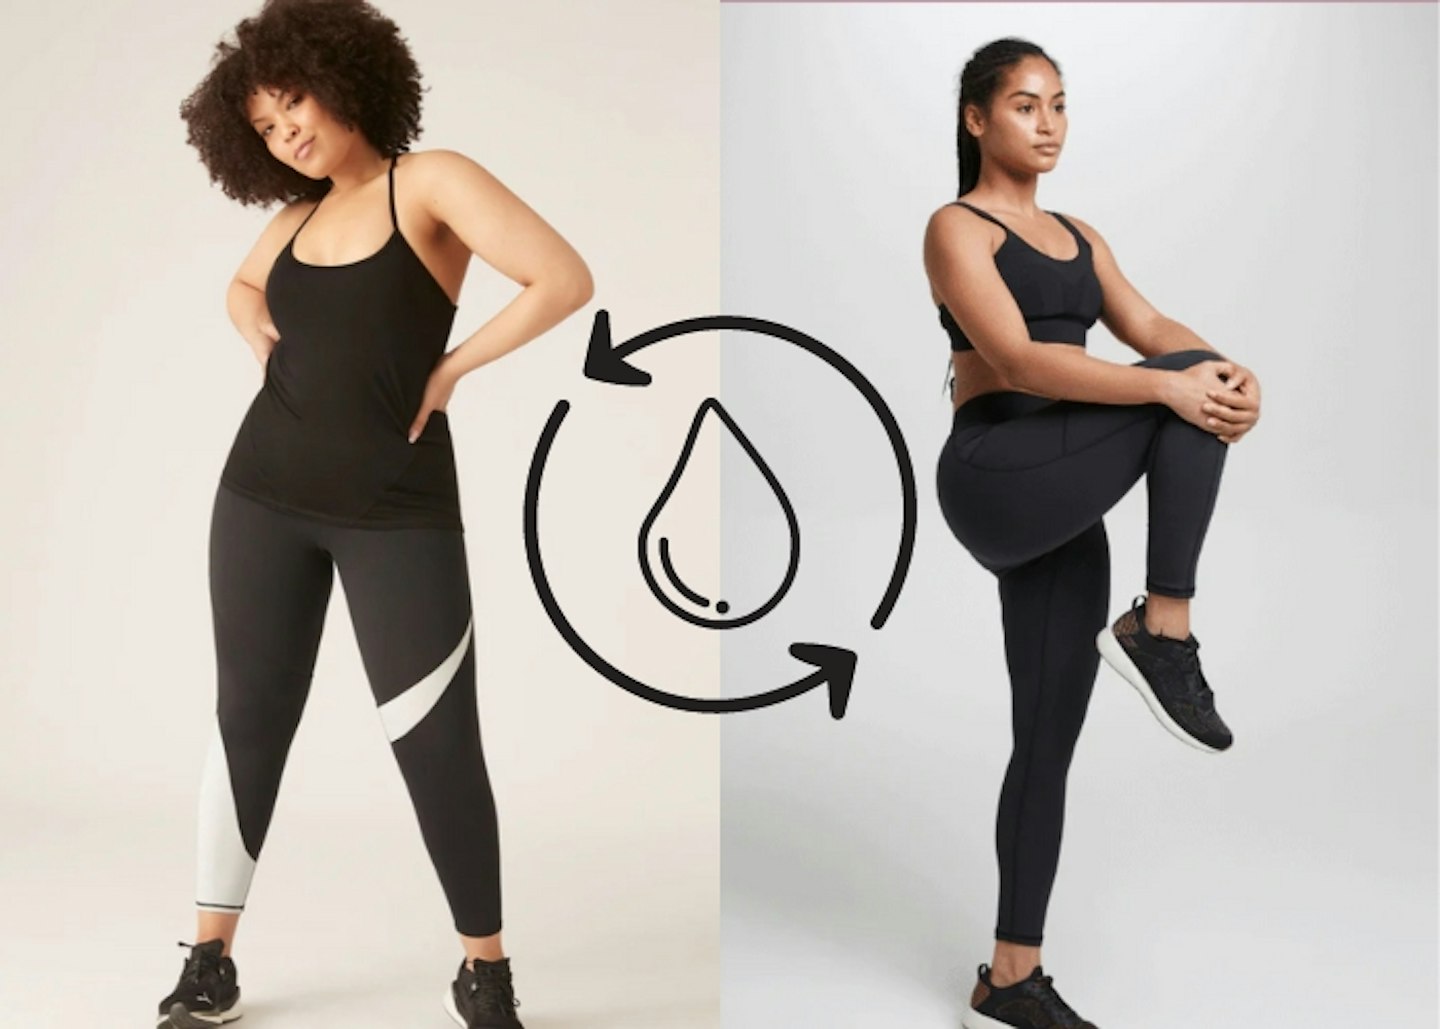 Period pants and proof leggings exist - here's what you need to